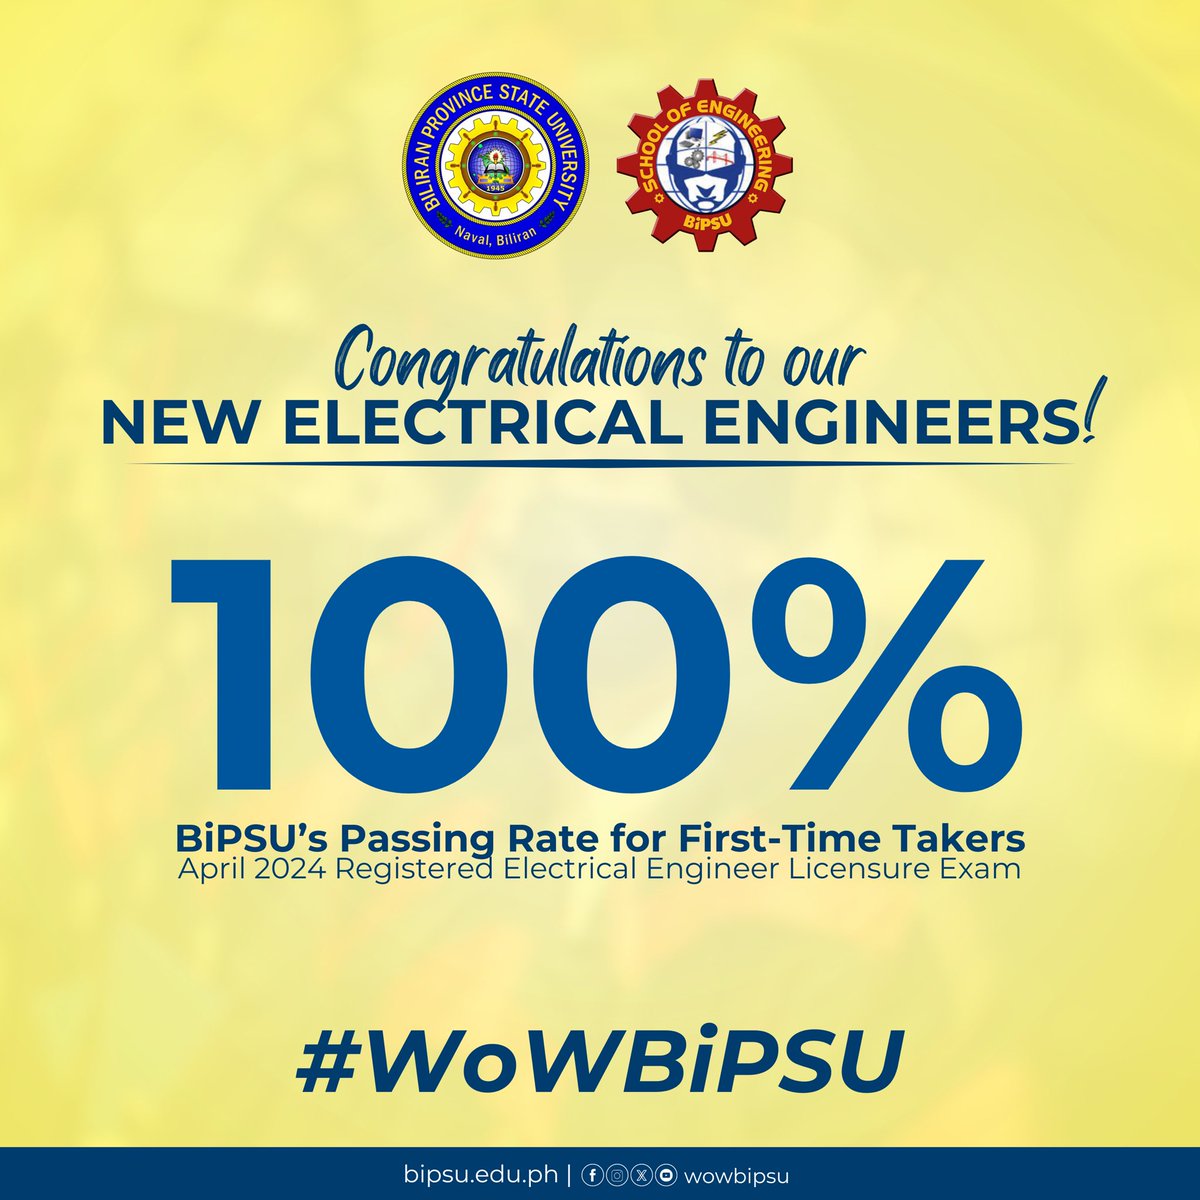 Biliran Province State University (BiPSU) is proud to announce that all first-time takers from its Electrical Engineering program have successfully passed the April 2024 Registered Electrical Engineer (REE) Licensure Examination, achieving a commendable 100% passing rate.